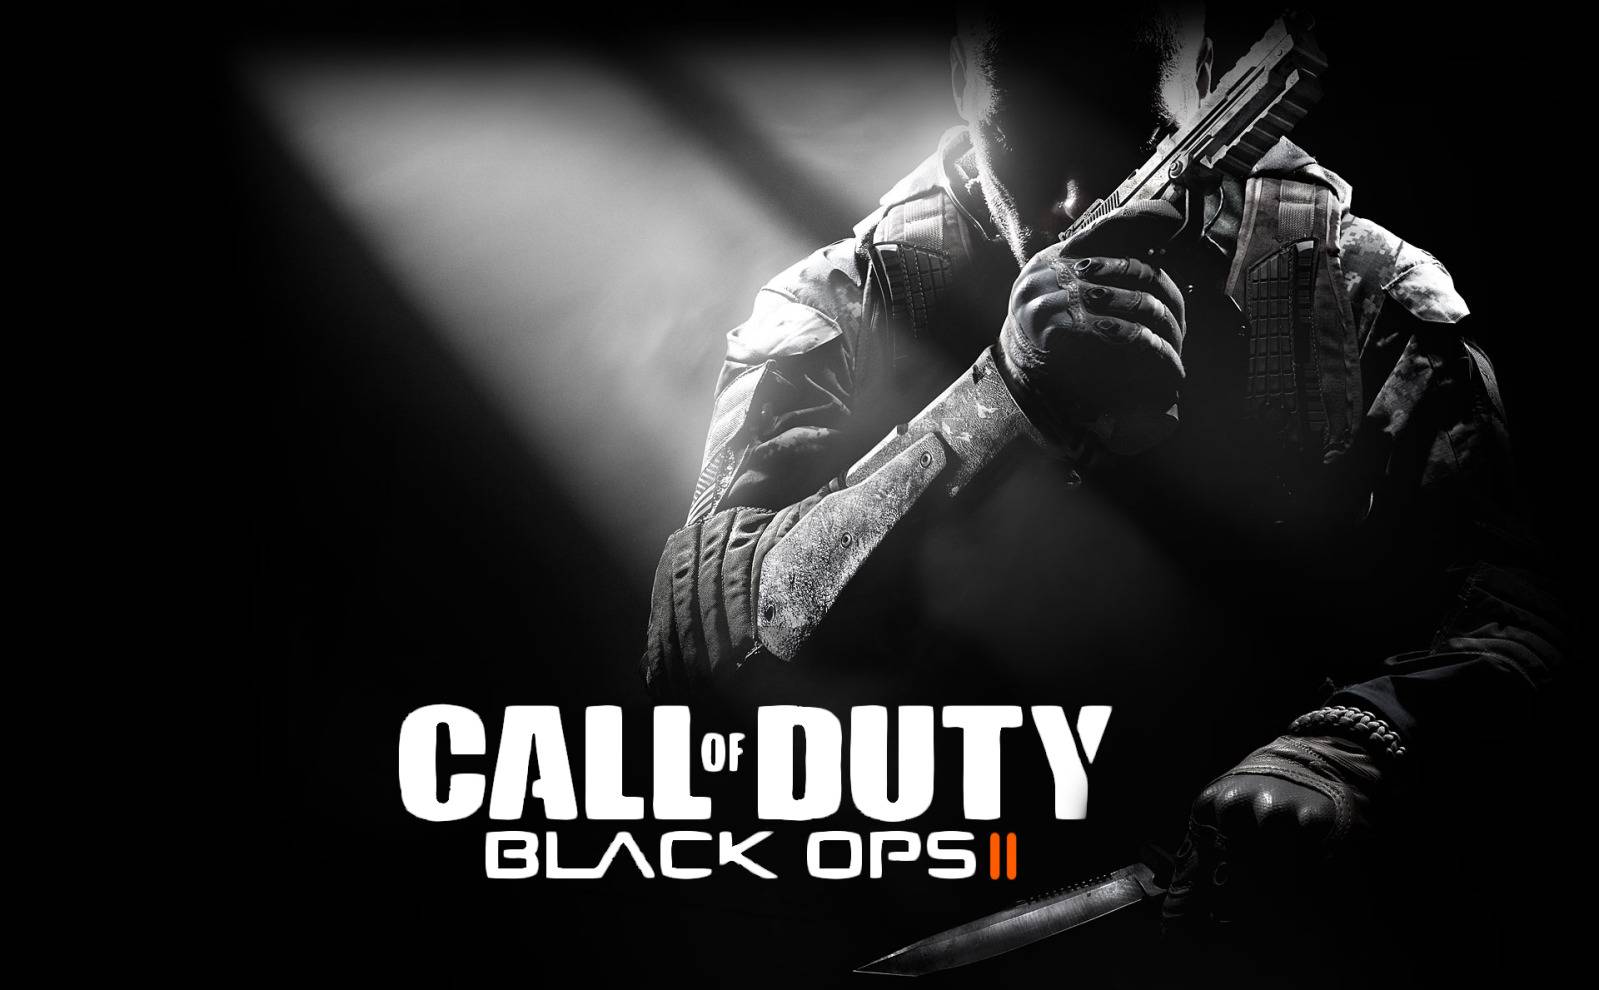 Call Of Duty Black Ops 2 Wallpapers in HD GamingBoltcom Video